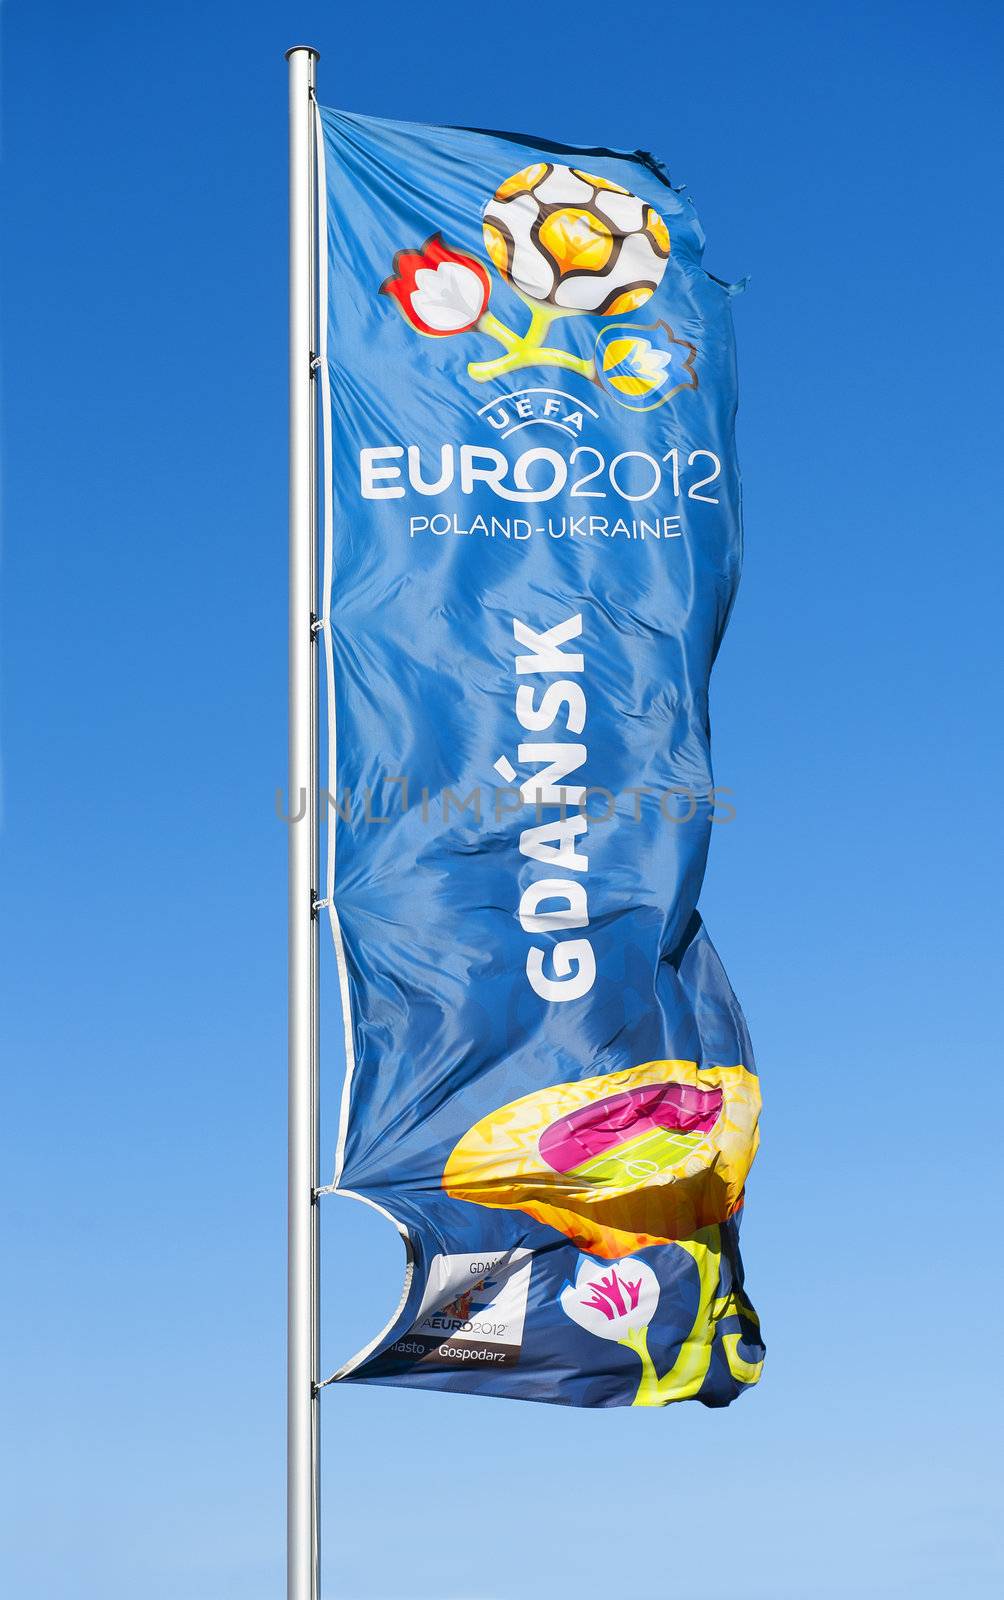 GDANSK, POLAND - MAY 1: A flag with the official logo for UEFA EURO 2012, Gdansk, Poland, May 1, 2012